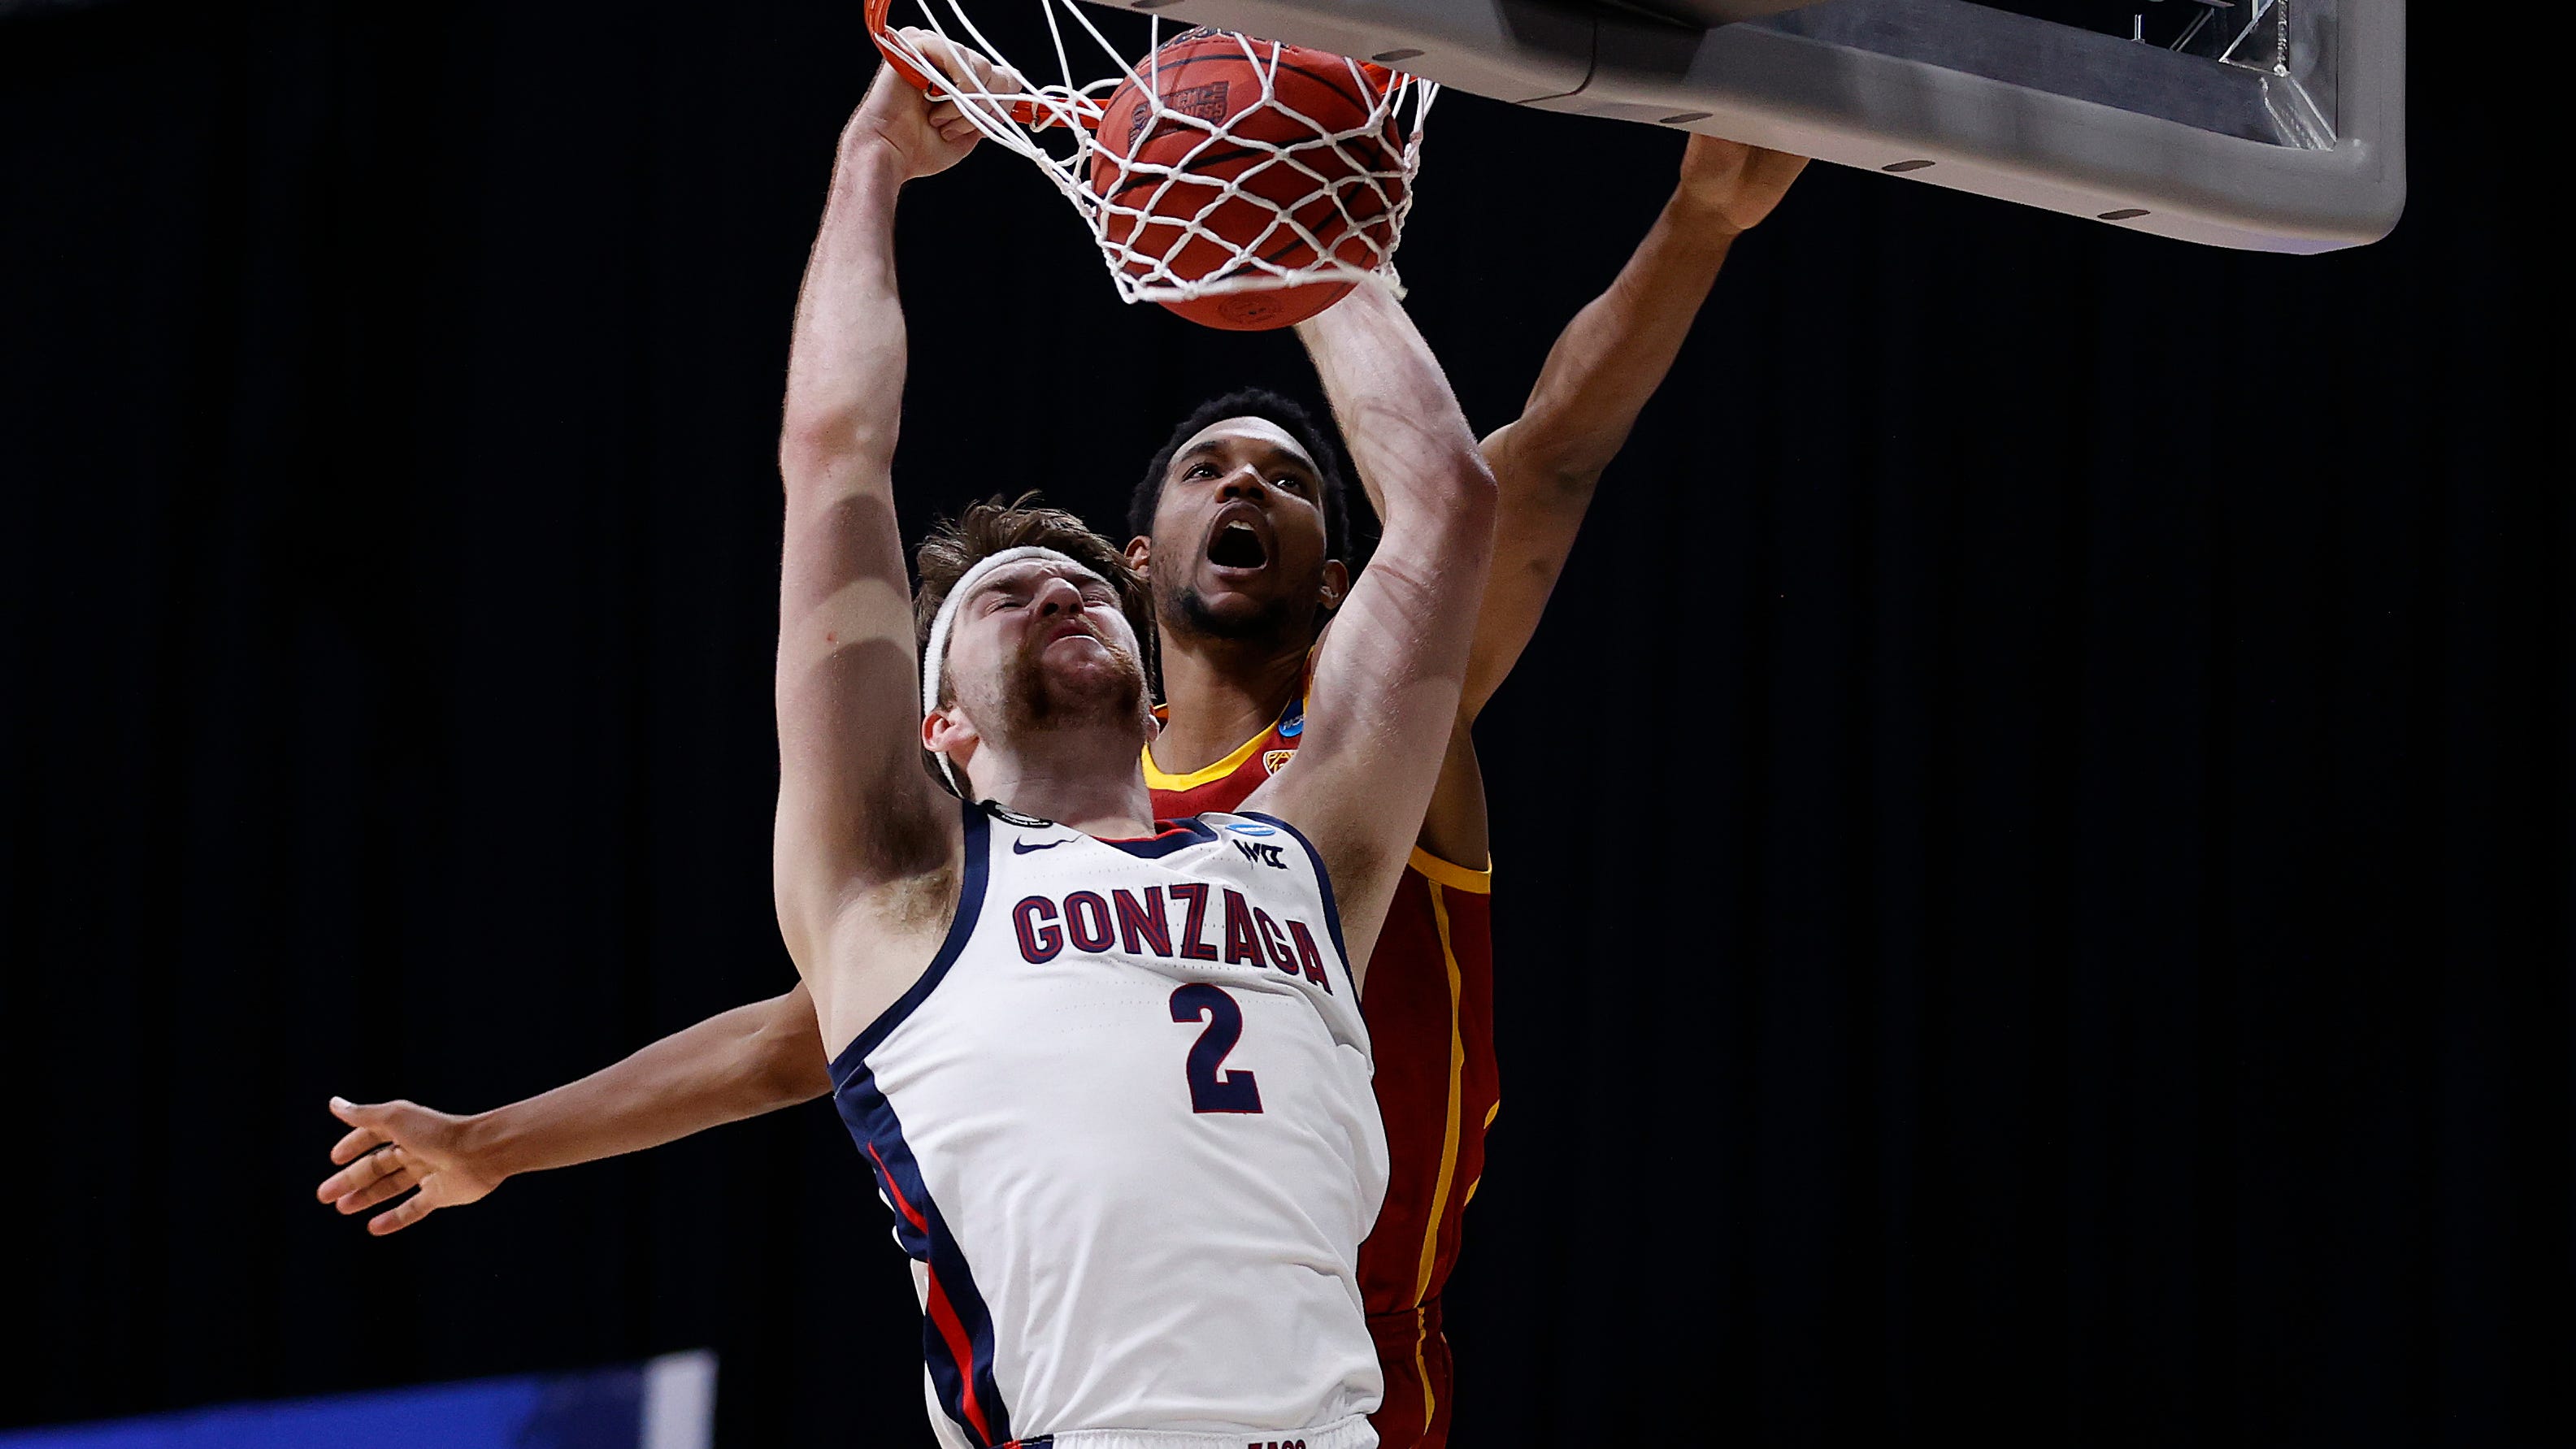 Elite Eight Gonzaga routs USC to reach Final Four, stay undefeated